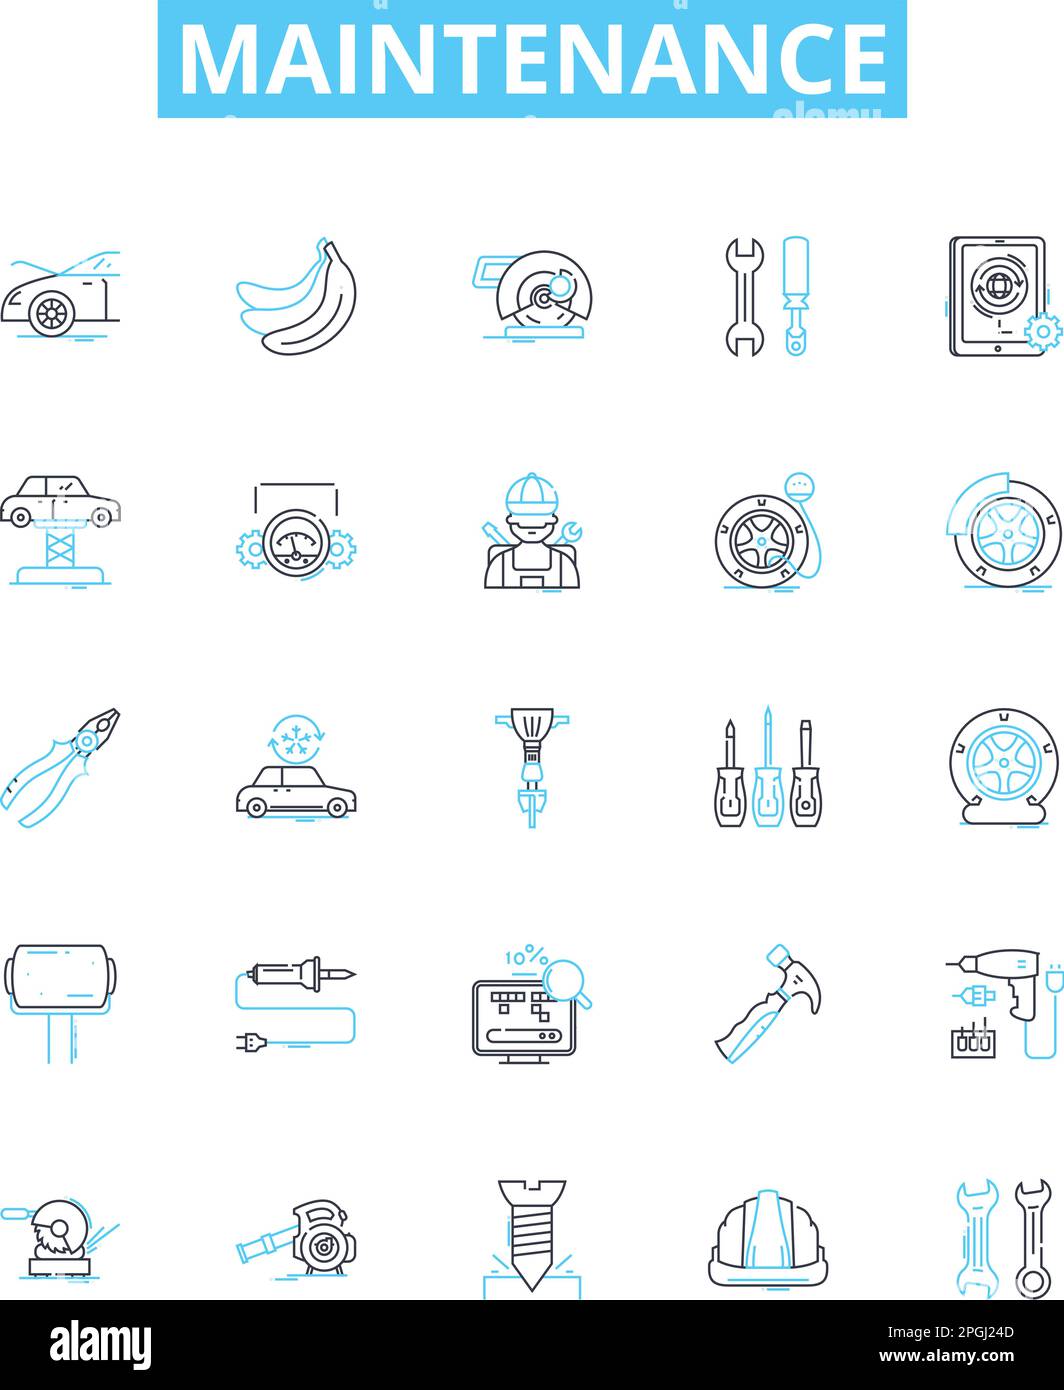 Maintenance vector line icons set. Repairs, Upkeep, Service, Adjustment, Restoration, Overhaul, Checkup illustration outline concept symbols and signs Stock Vector